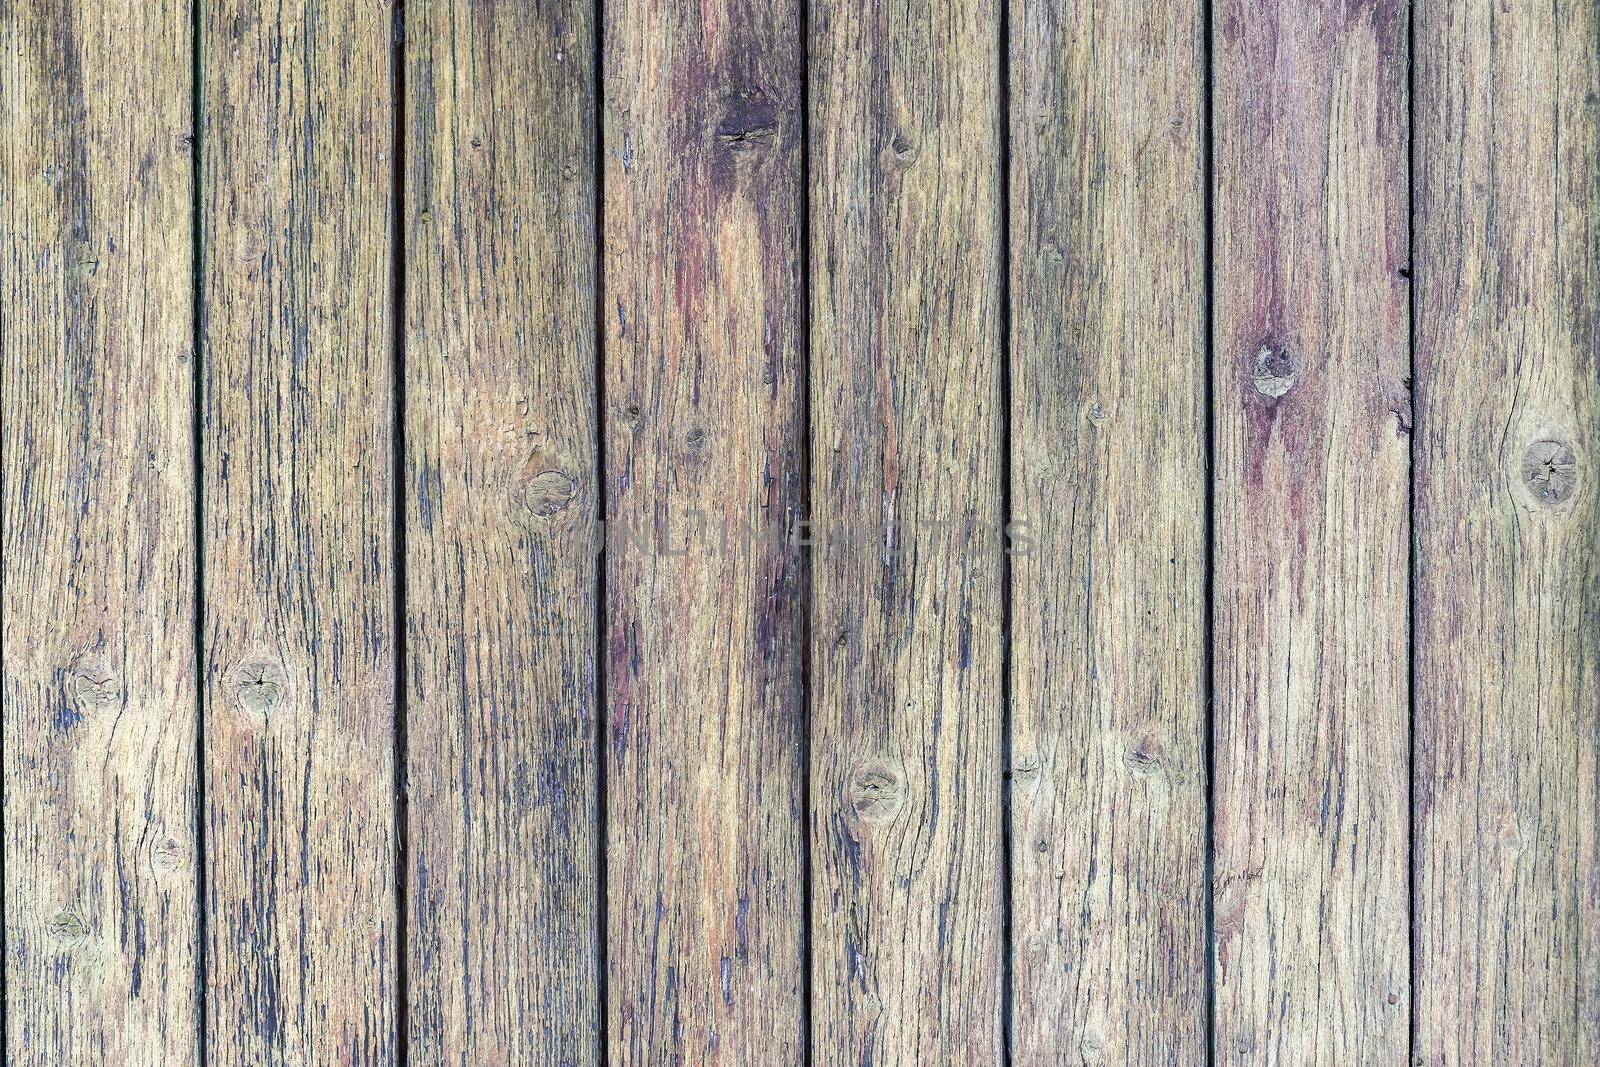 Plank area vertically laid, shabby Texture, background for further work.